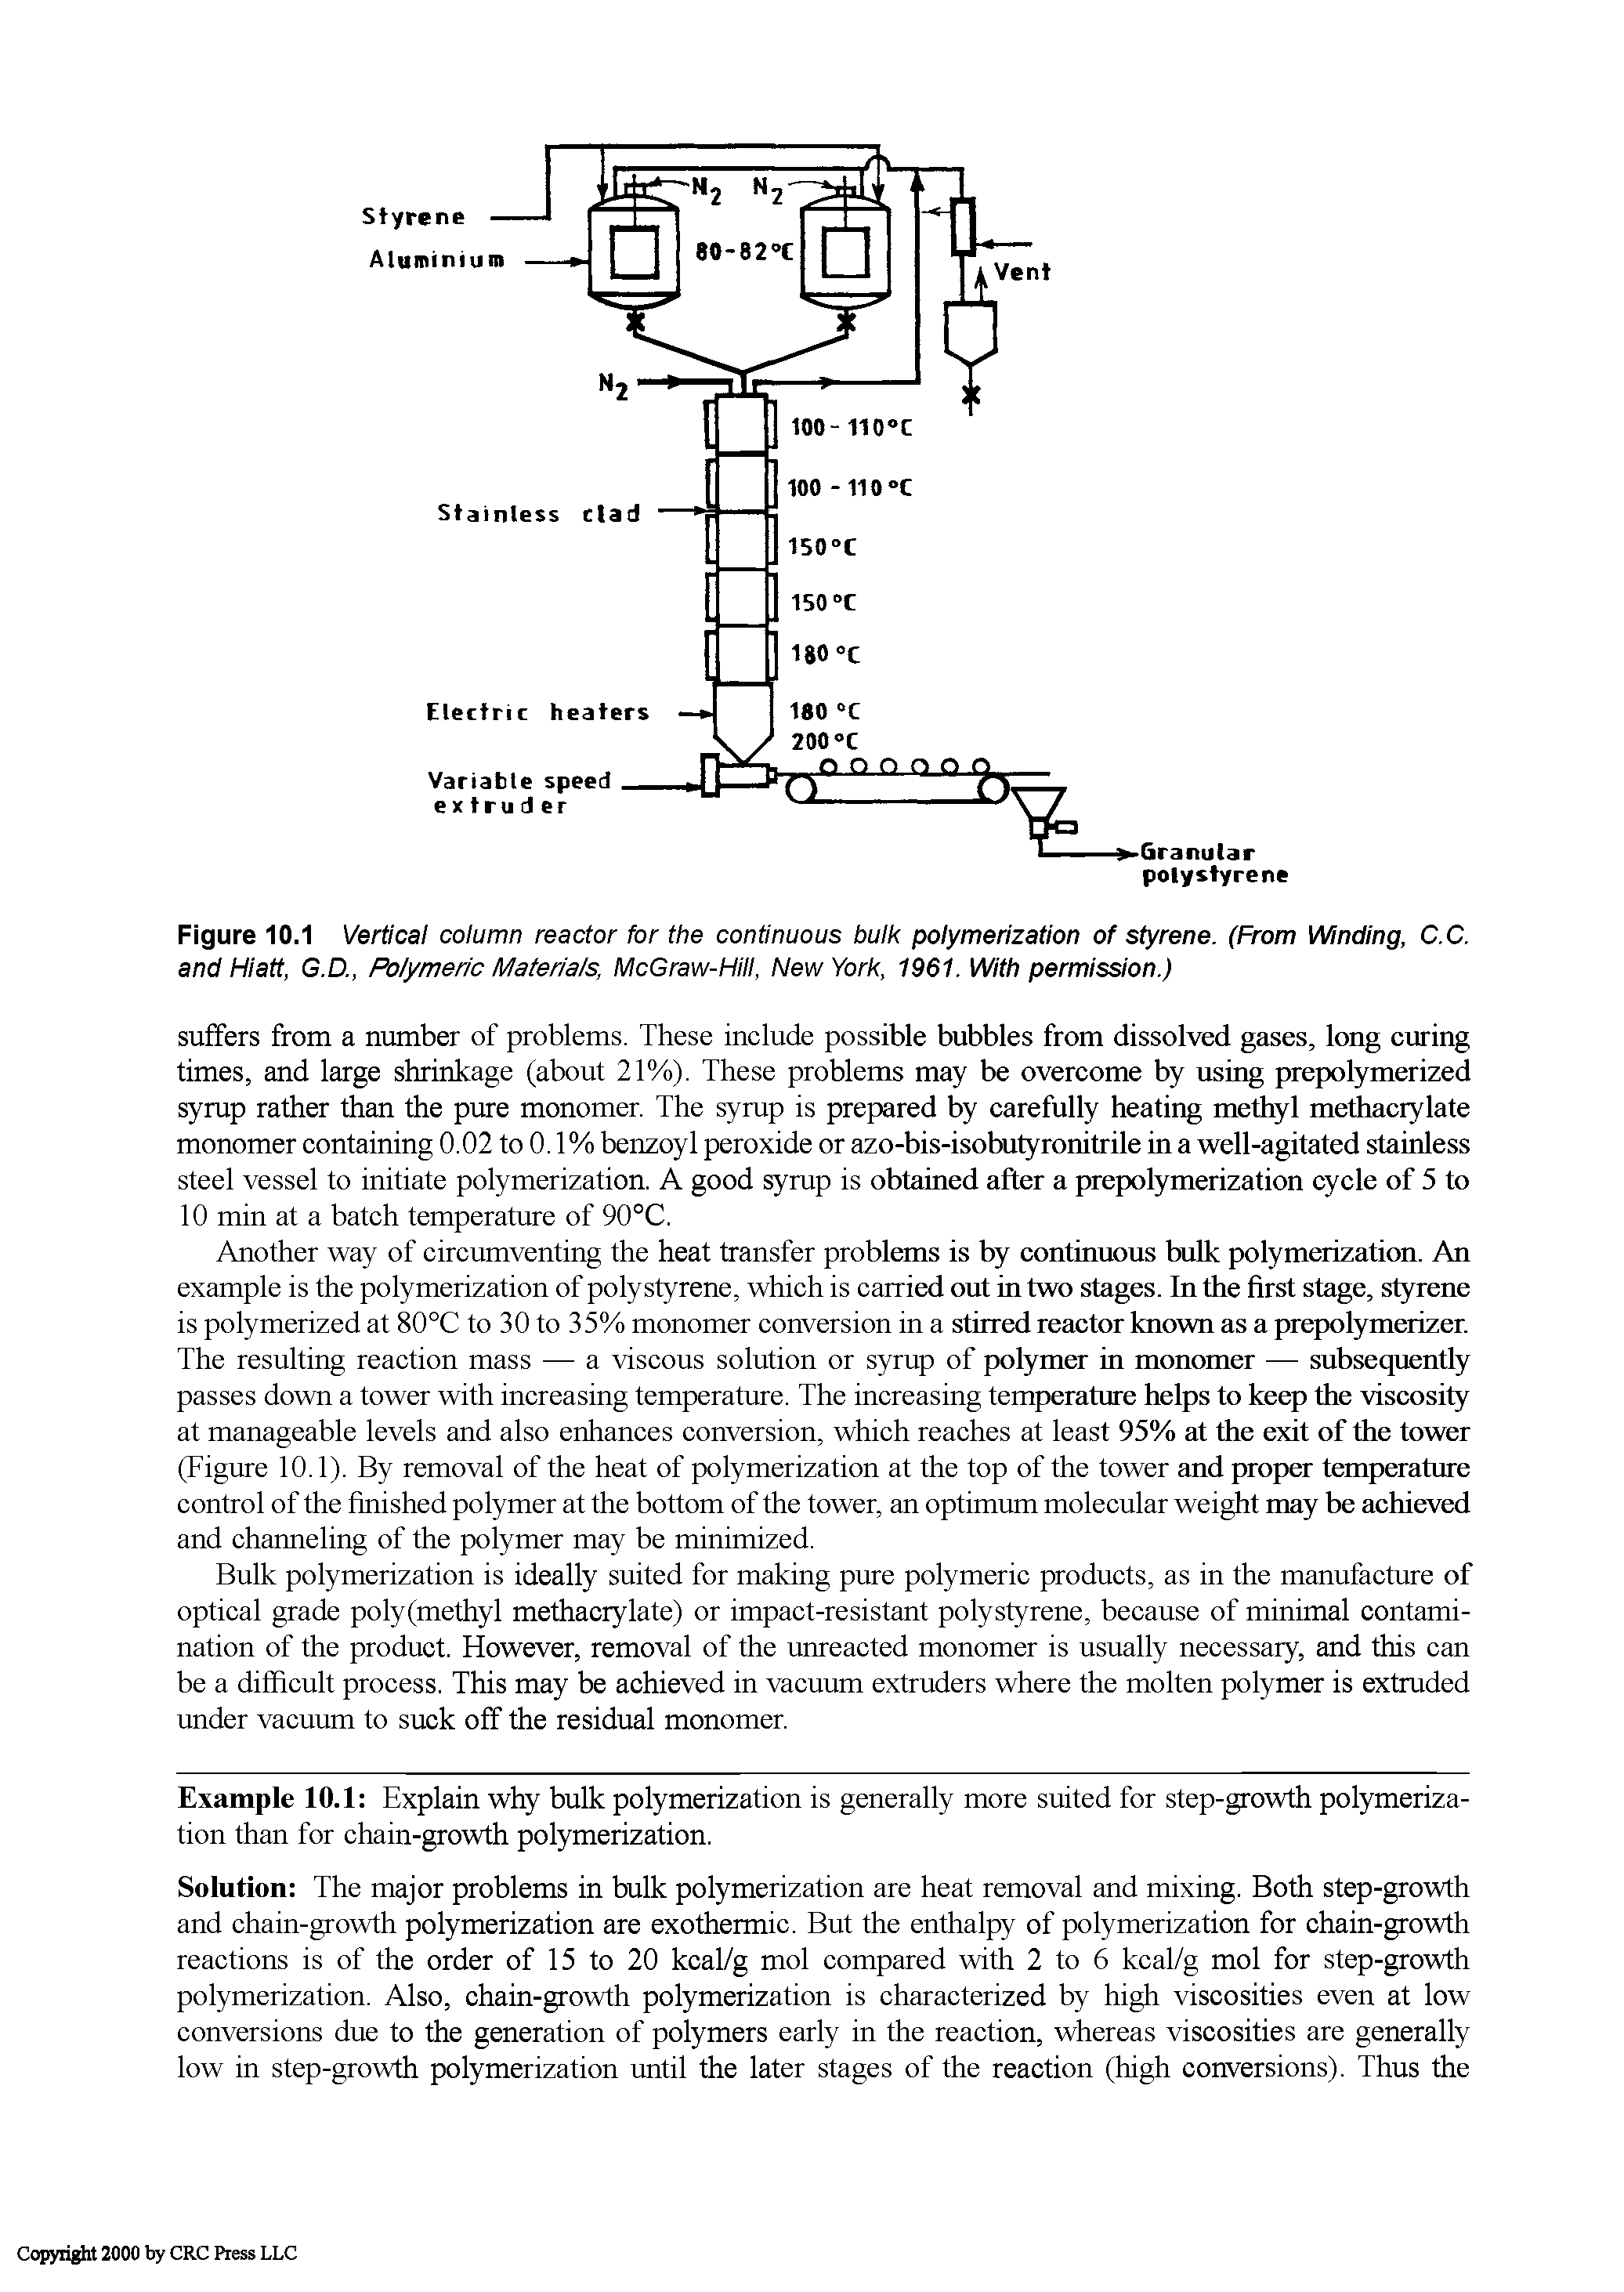 Figure 10.1 Vertical column reactor for the continuous bulk polymerization of styrene. (From Winding, C.C. and Hiatt, G.D., Polymeric Materials, McGraw-Hill, New York, 1961. With permission.)...